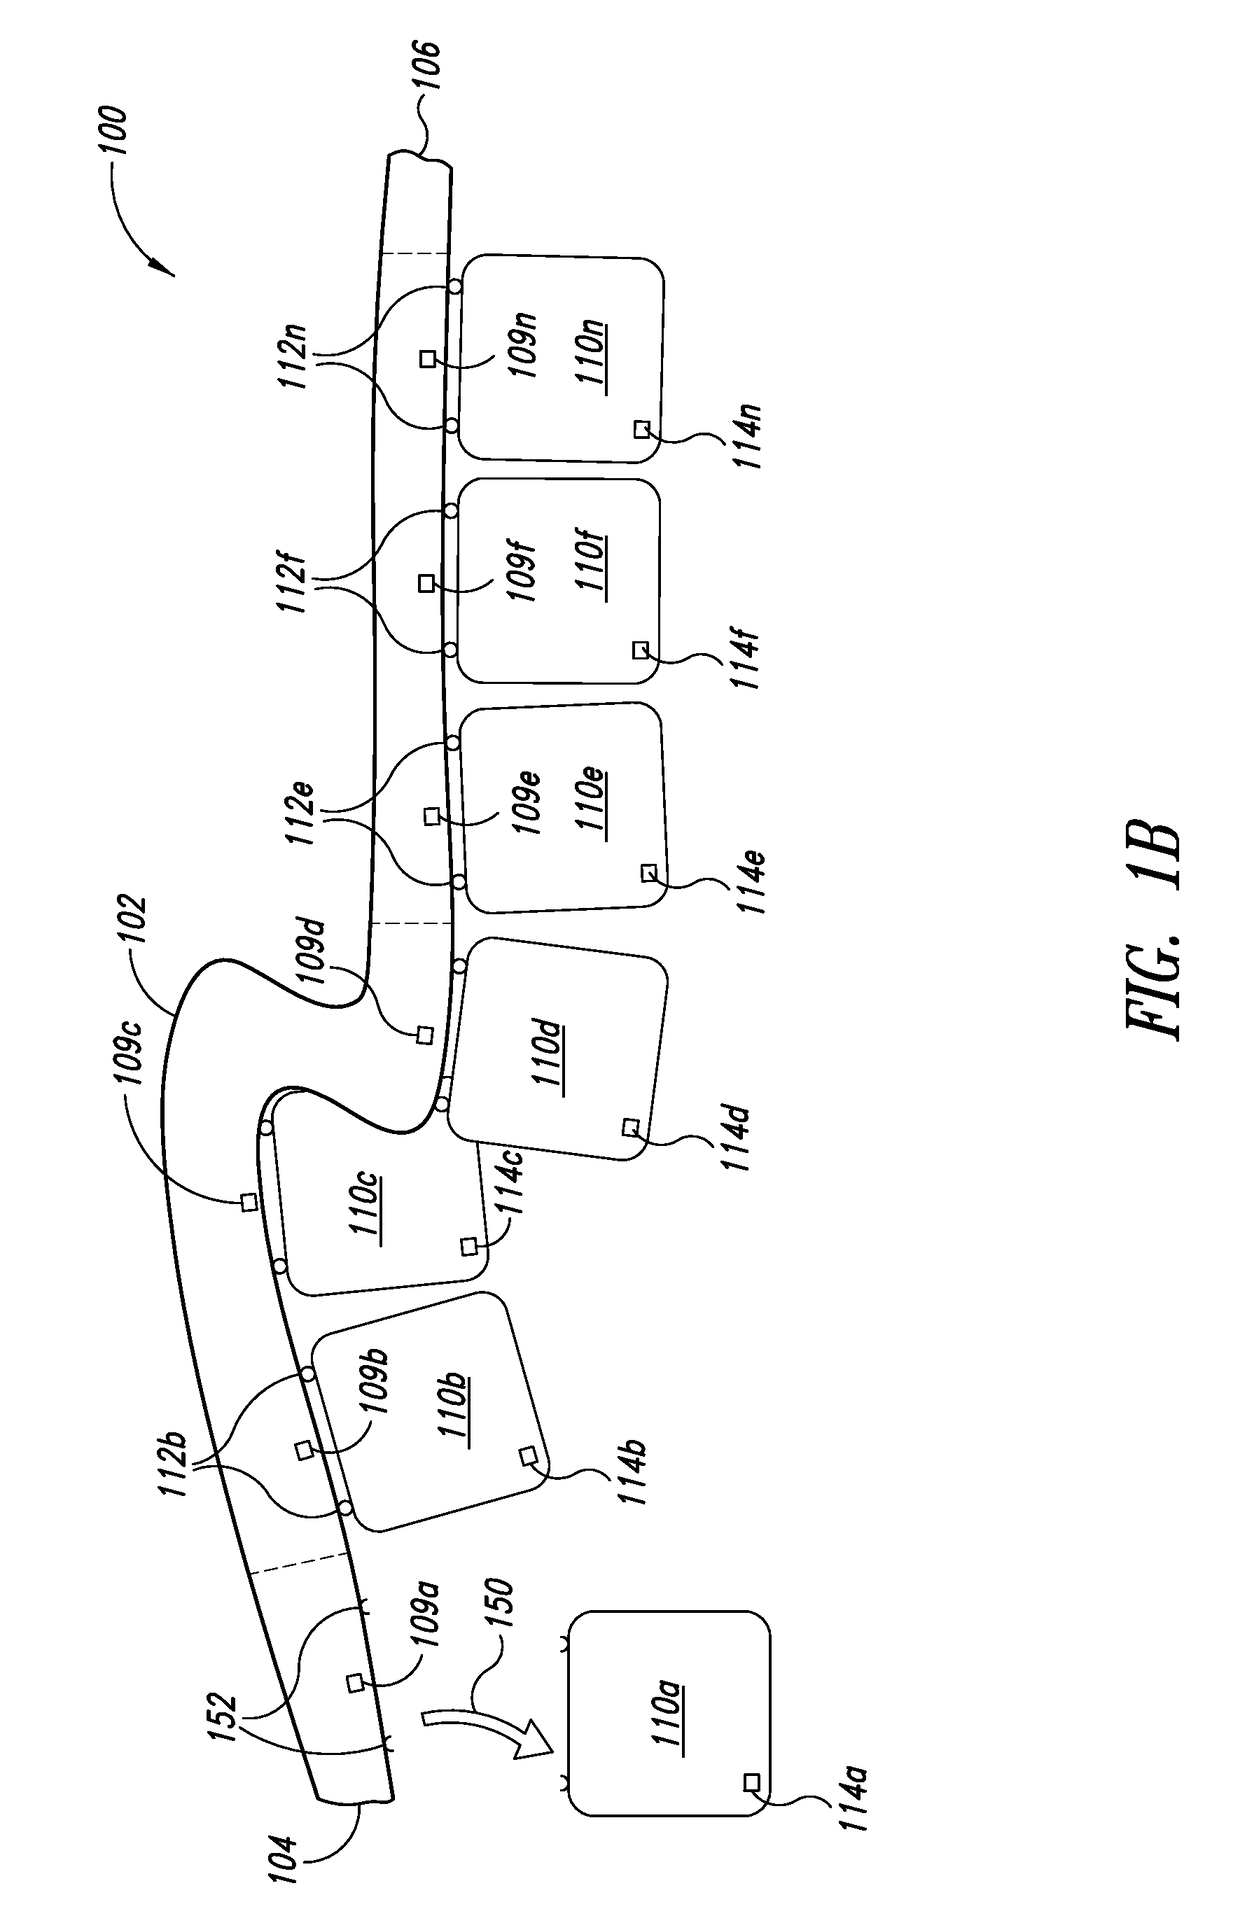 Surgical sponge distribution systems and methods